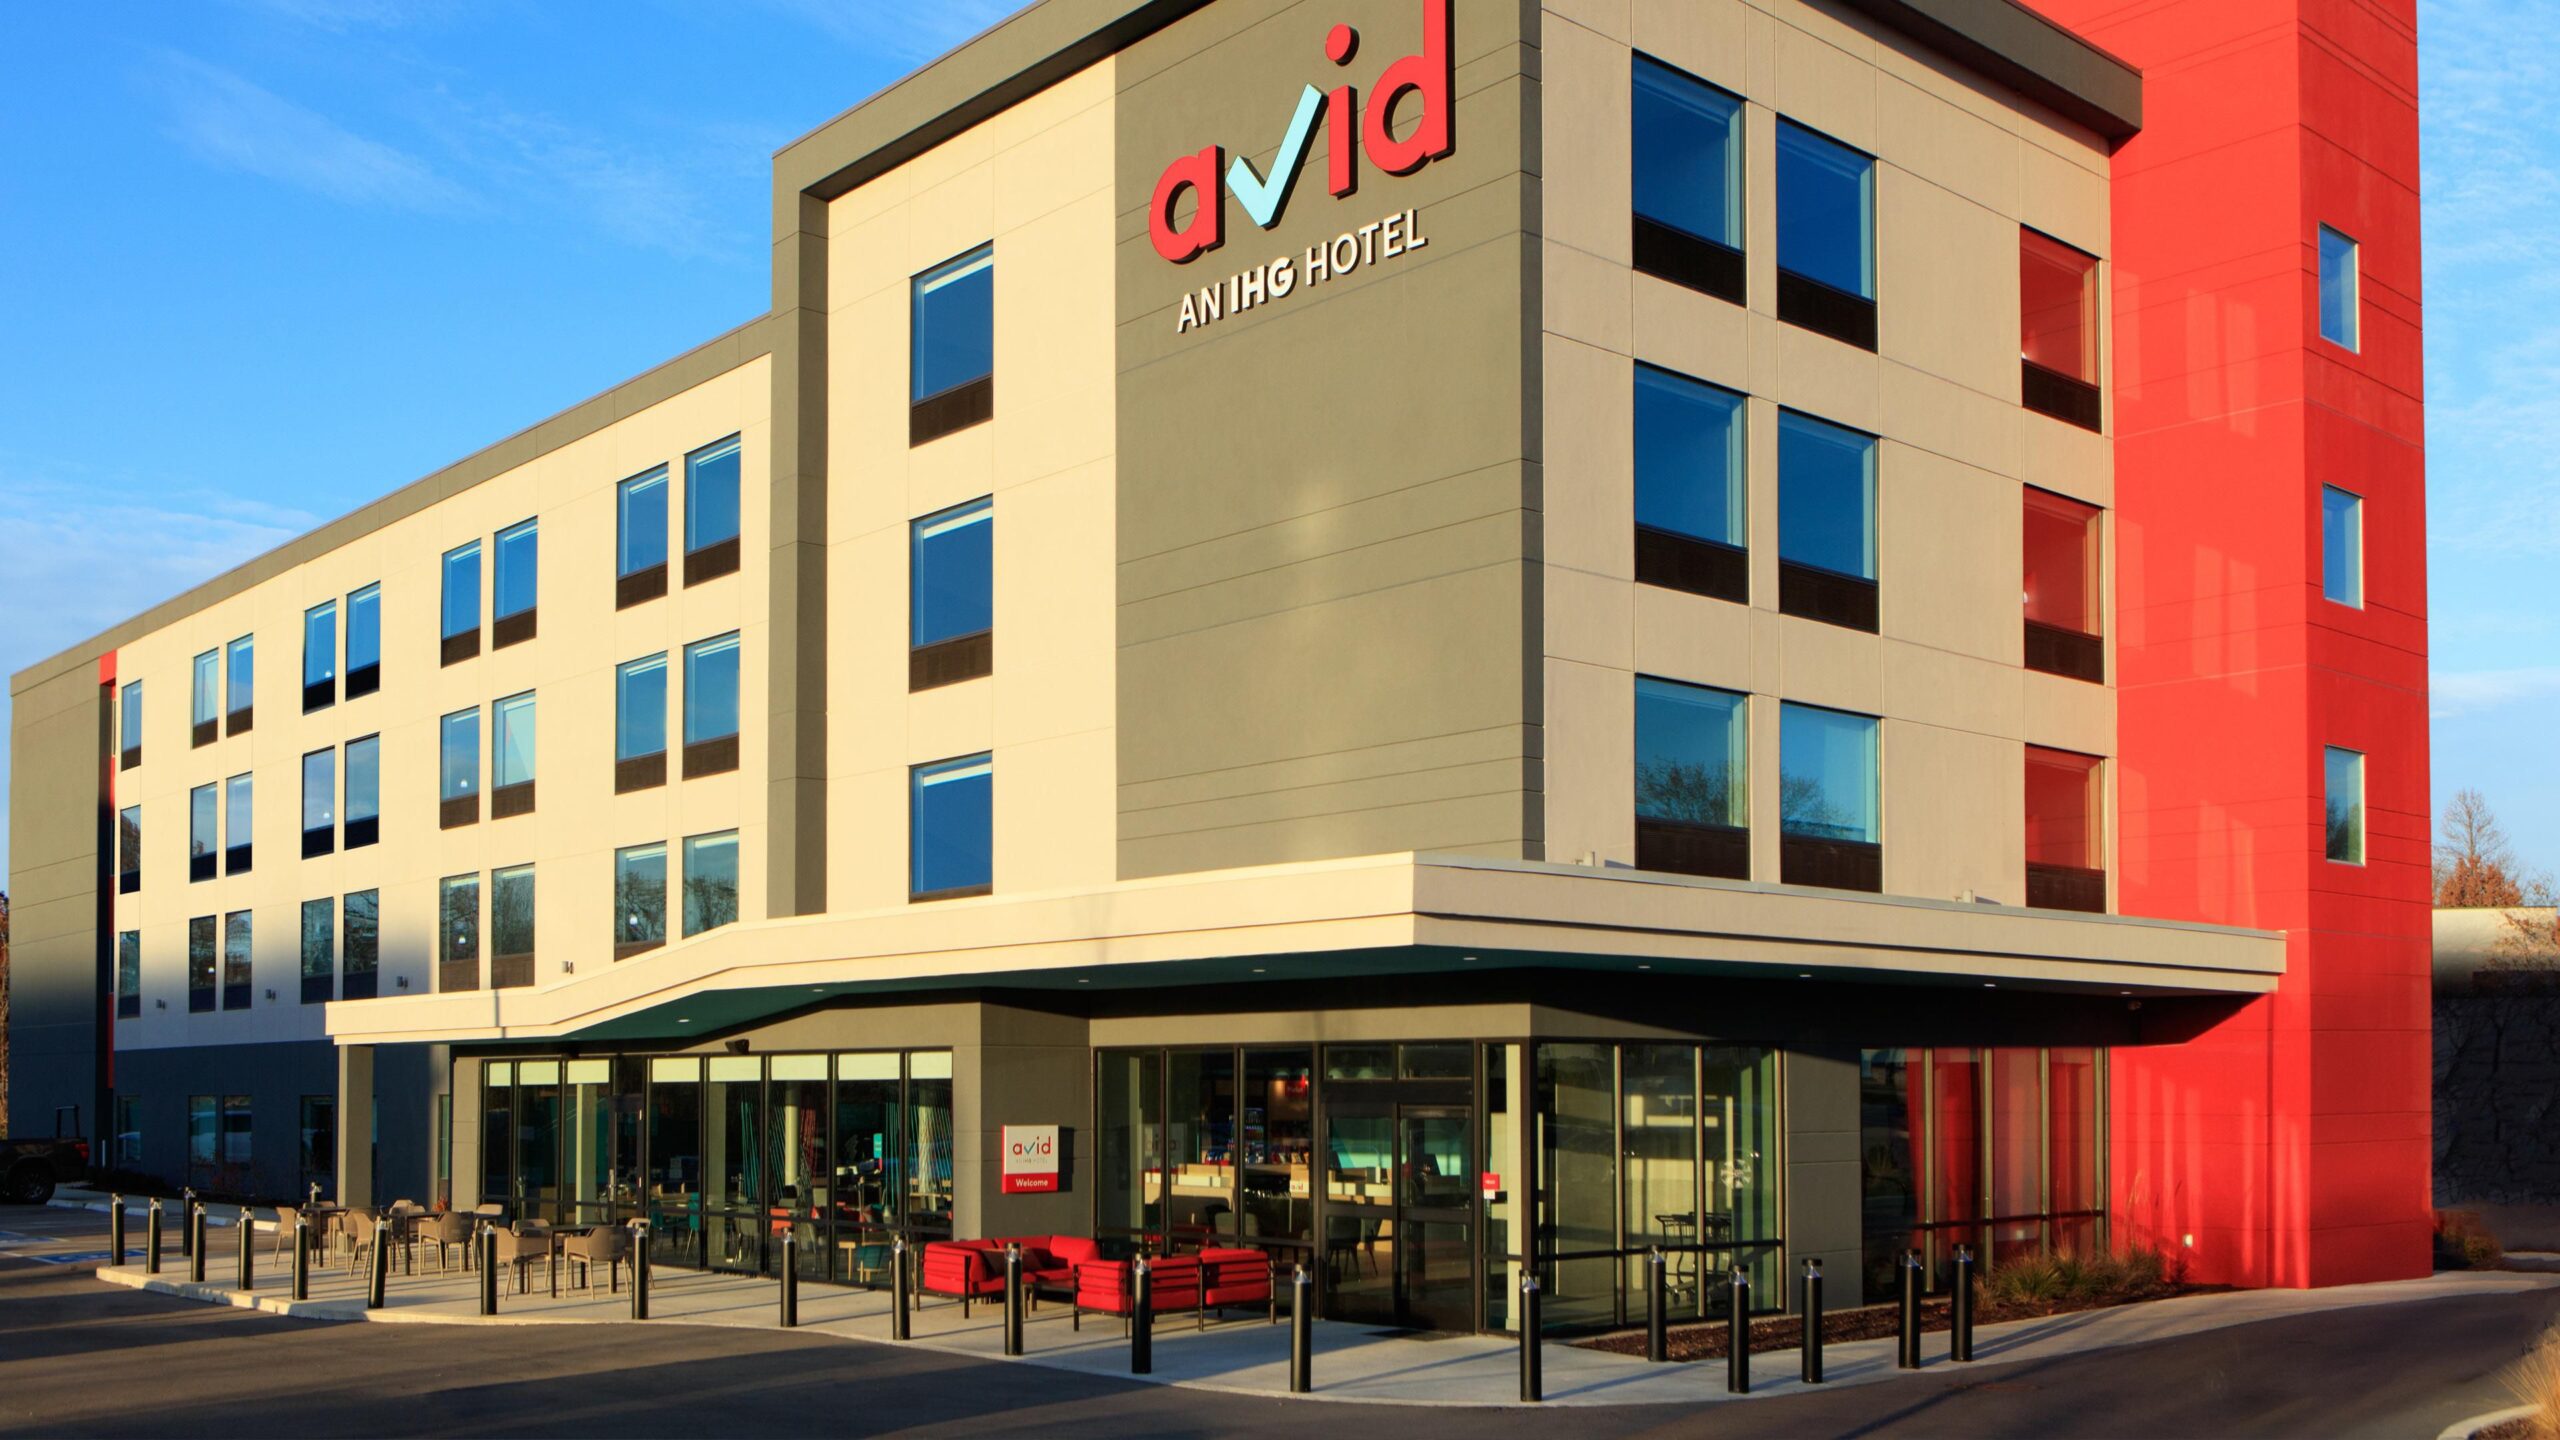 Avid Hotels Fort Mill 7619504938 16x9 1 Scaled 